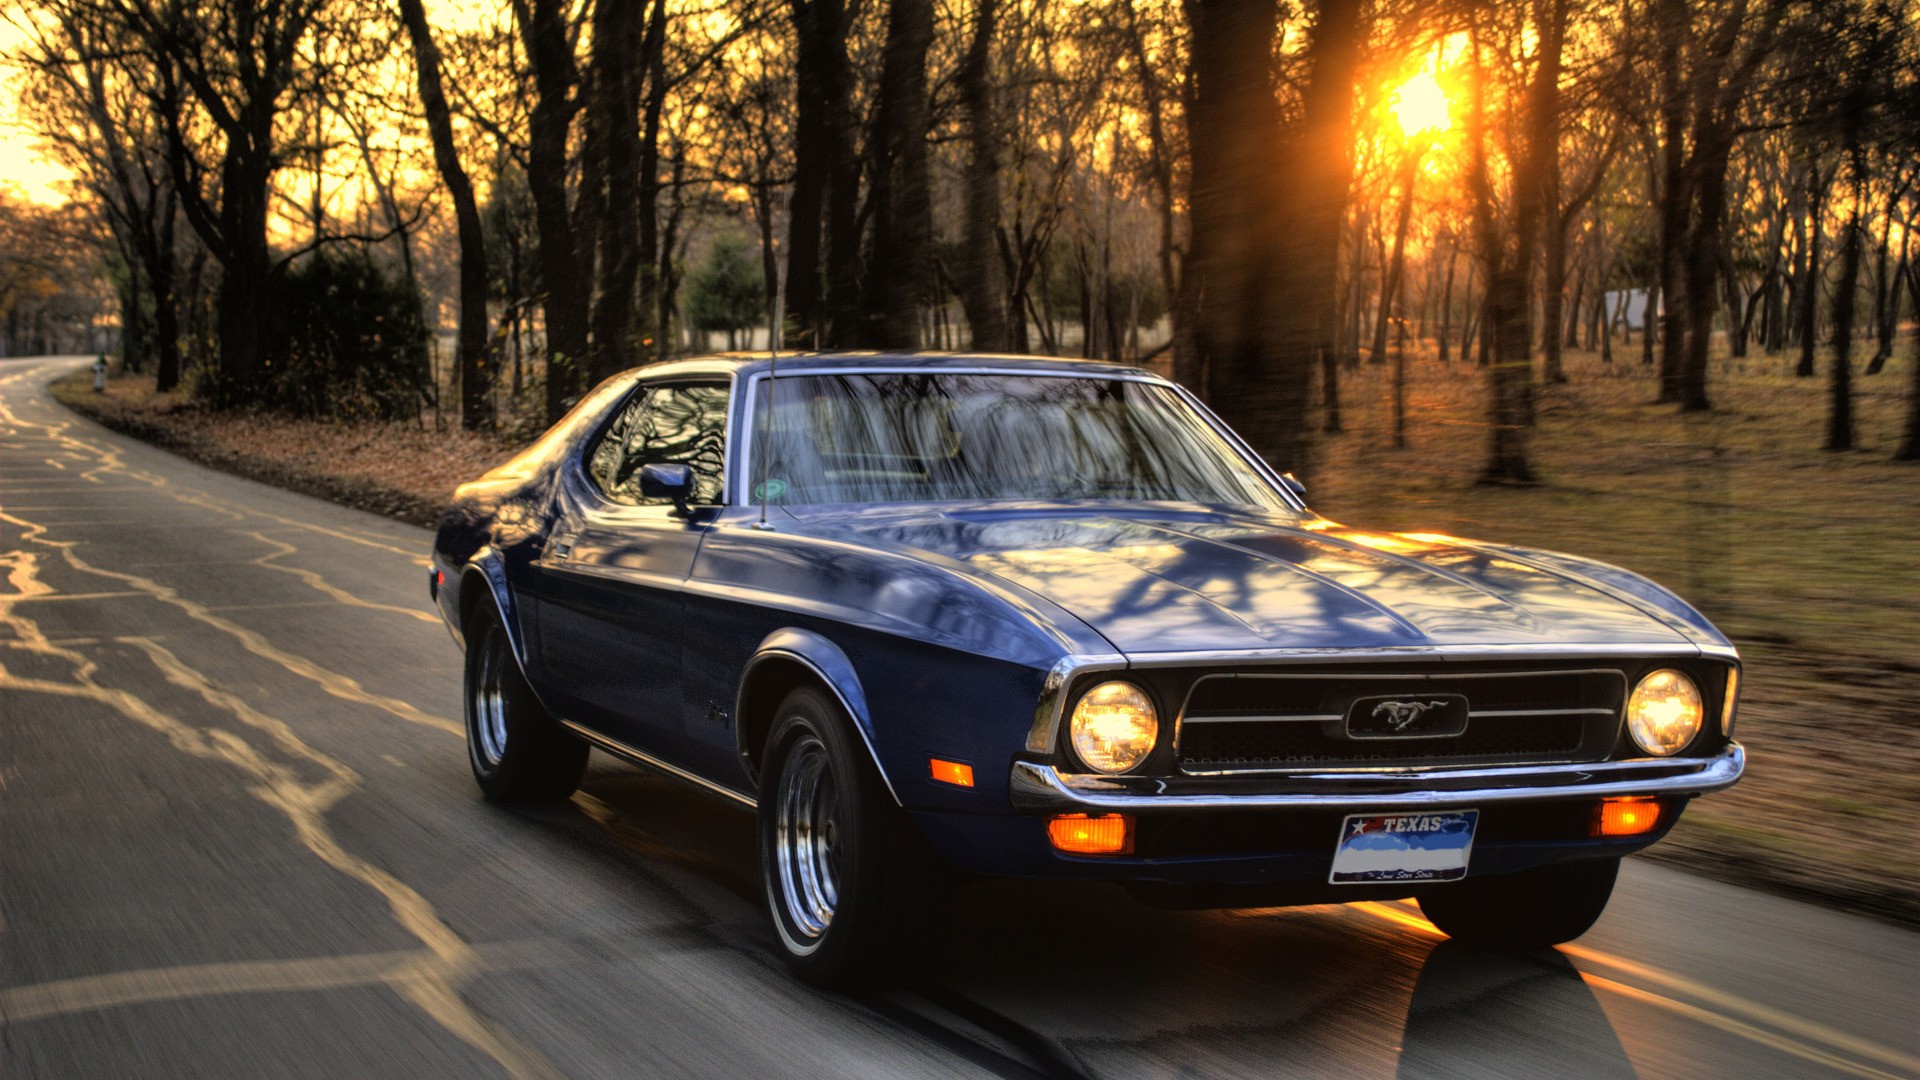 car, Ford, Ford Mustang, Sunset, Trees, Road, Muscle Cars Wallpaper